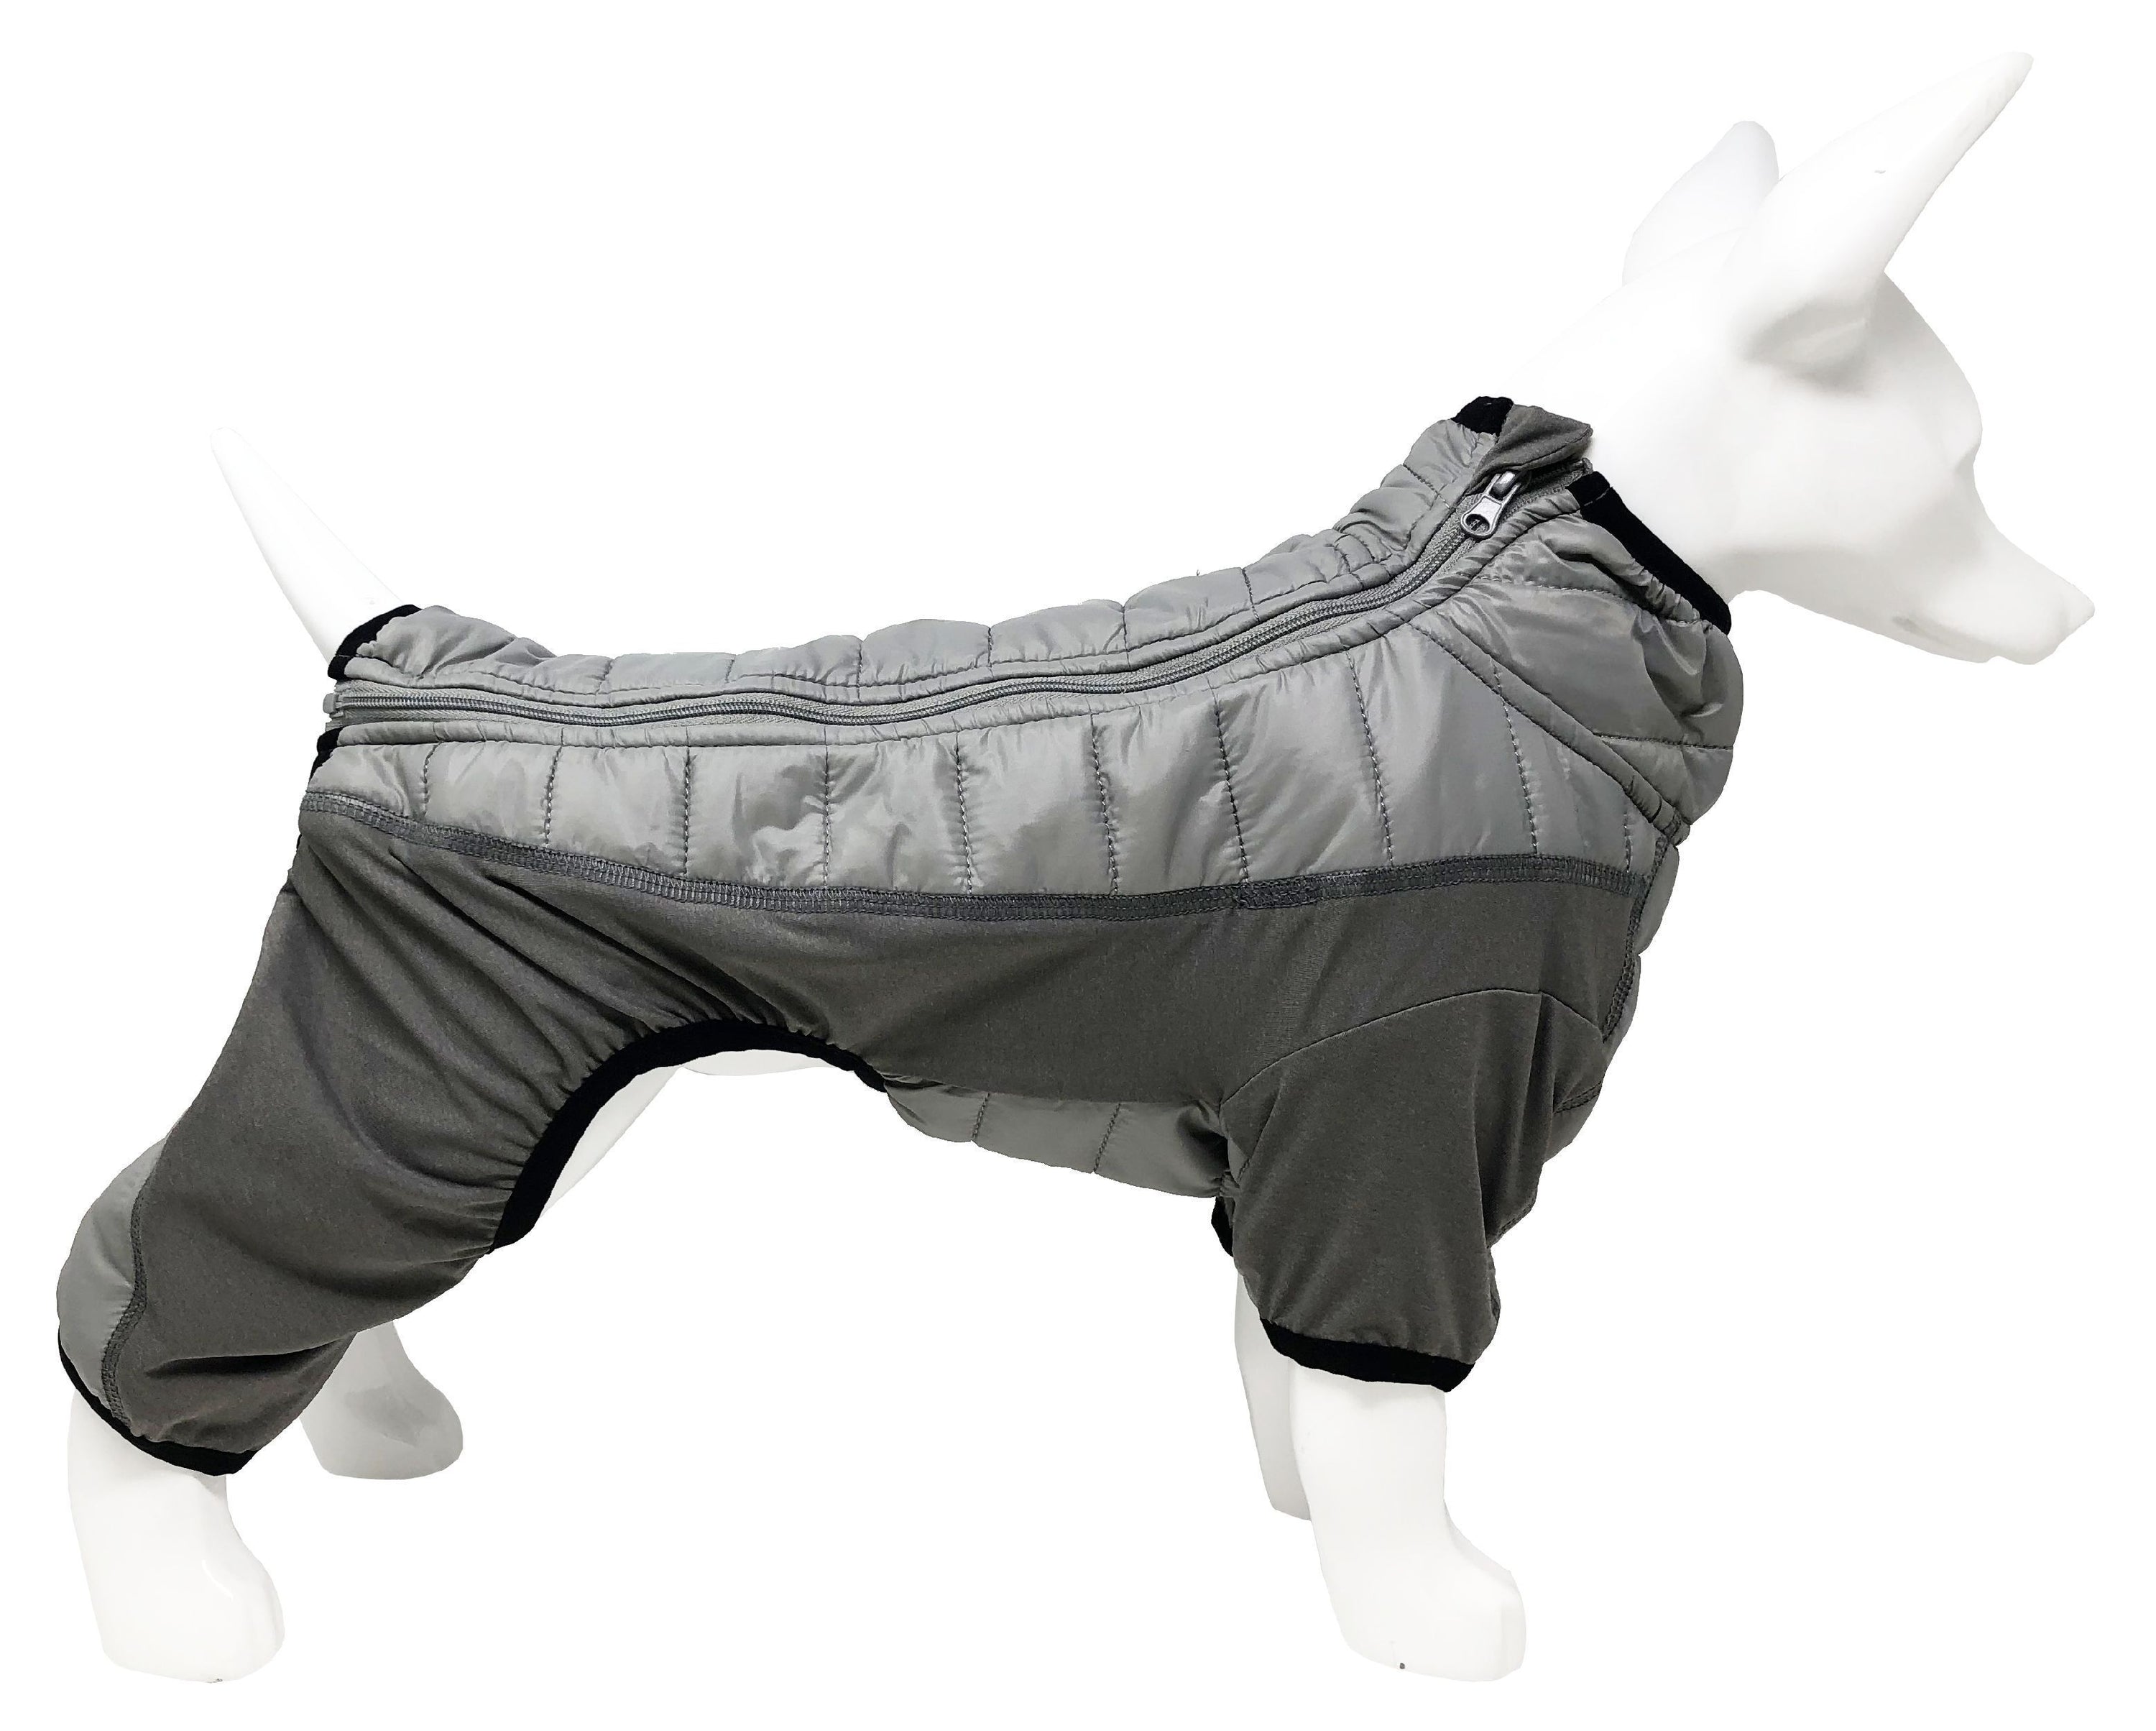 Pet Life ® 'Aura-Vent' Lightweight 4-Season Stretch and Quick-Dry Full Body Dog Jacket Gray X-Small